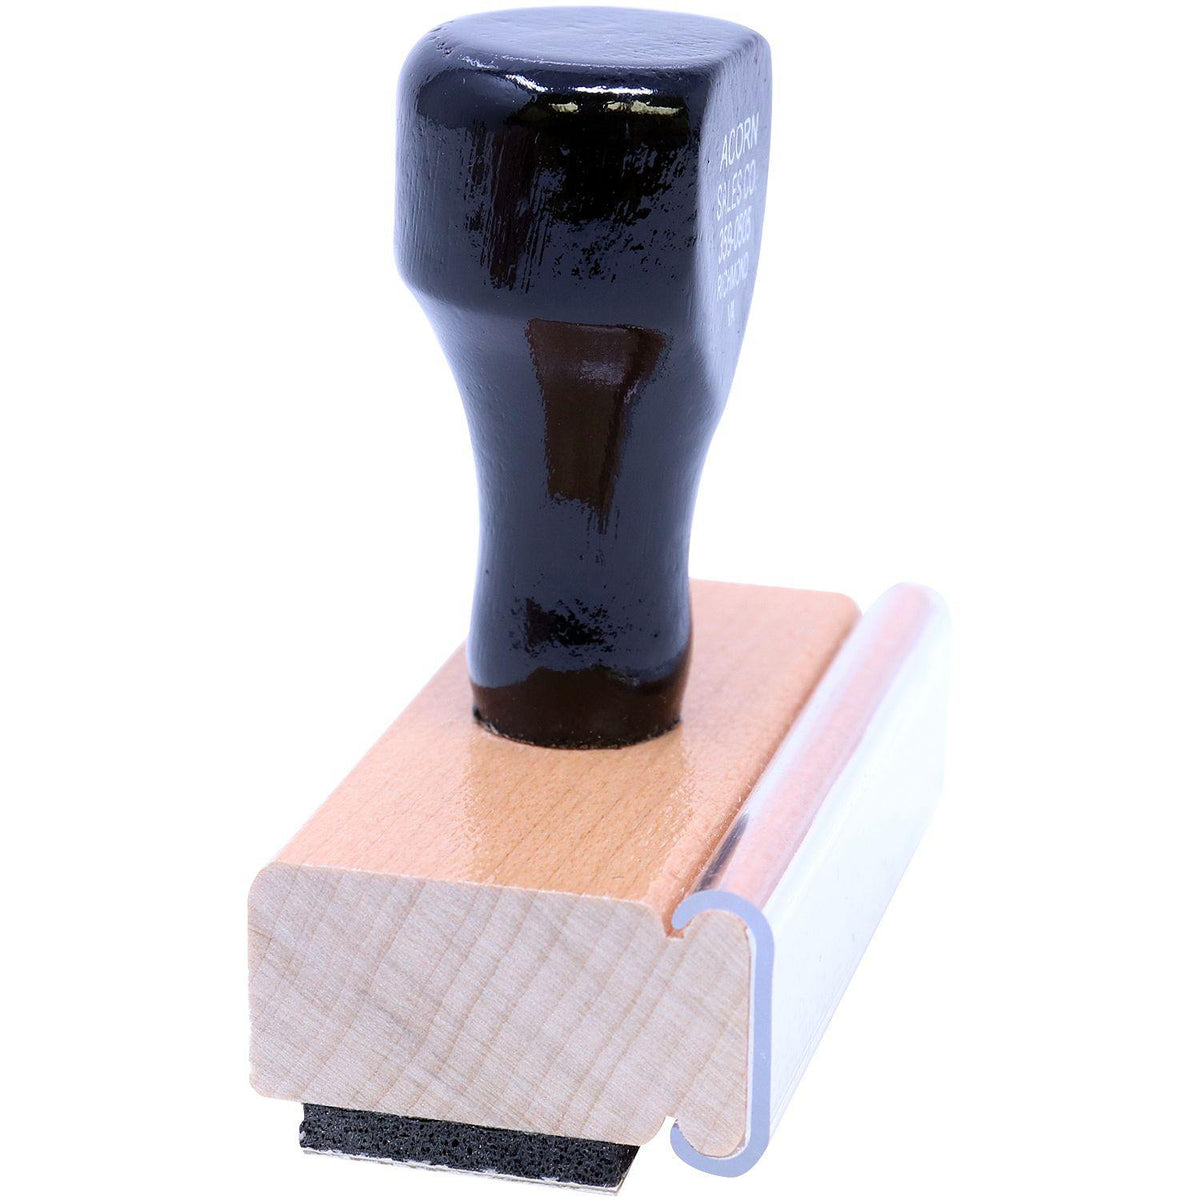 Side View of Large Return for Better Address Rubber Stamp at an Angle